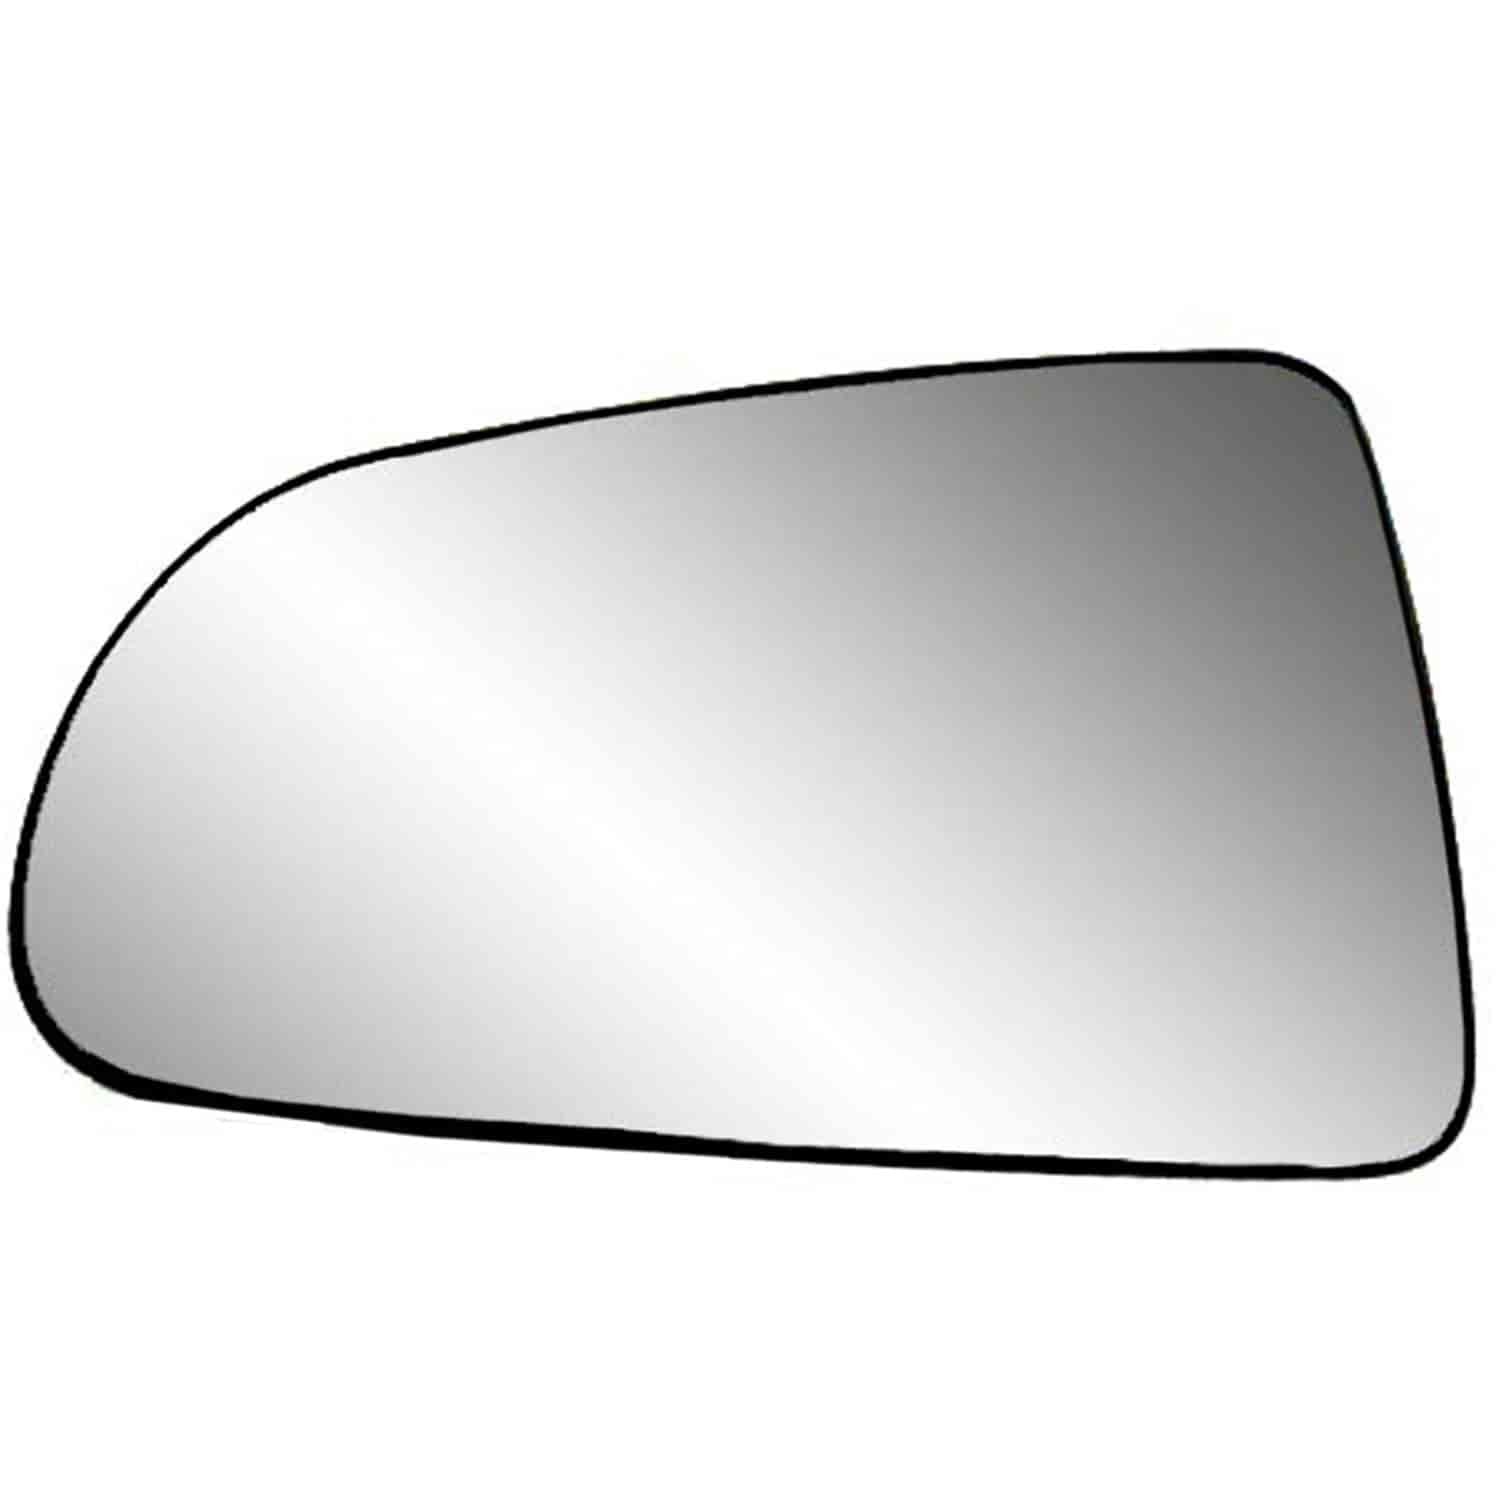 Replacement Glass Assembly for 05-10 Dakota non-foldaway mirrors 5x7 replace your cracked or broken